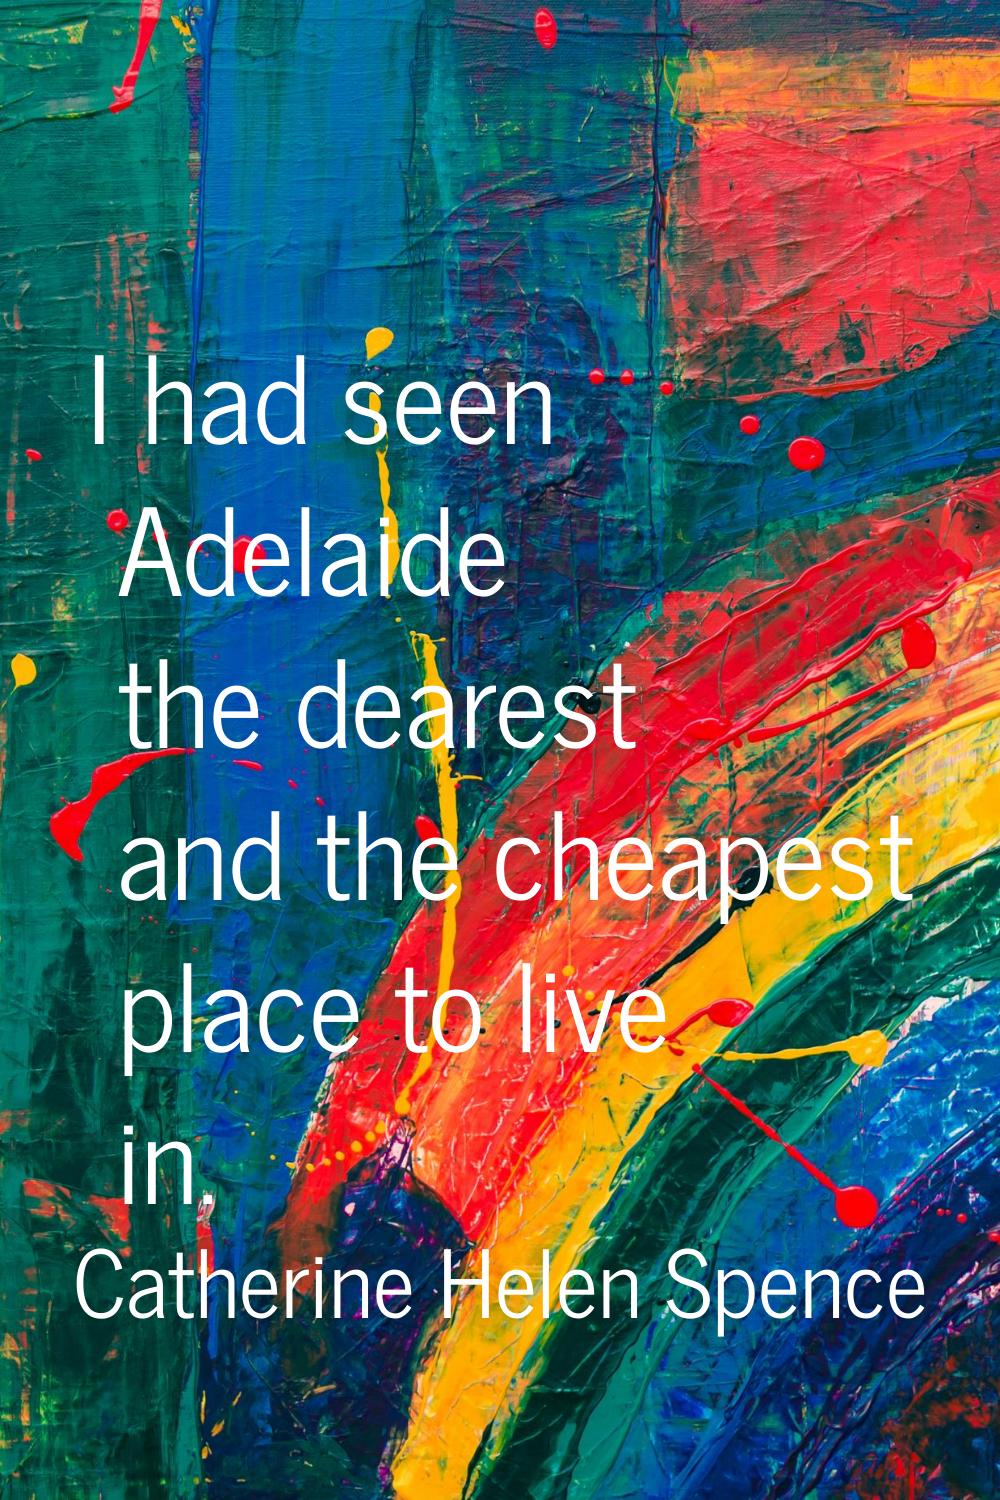 I had seen Adelaide the dearest and the cheapest place to live in.